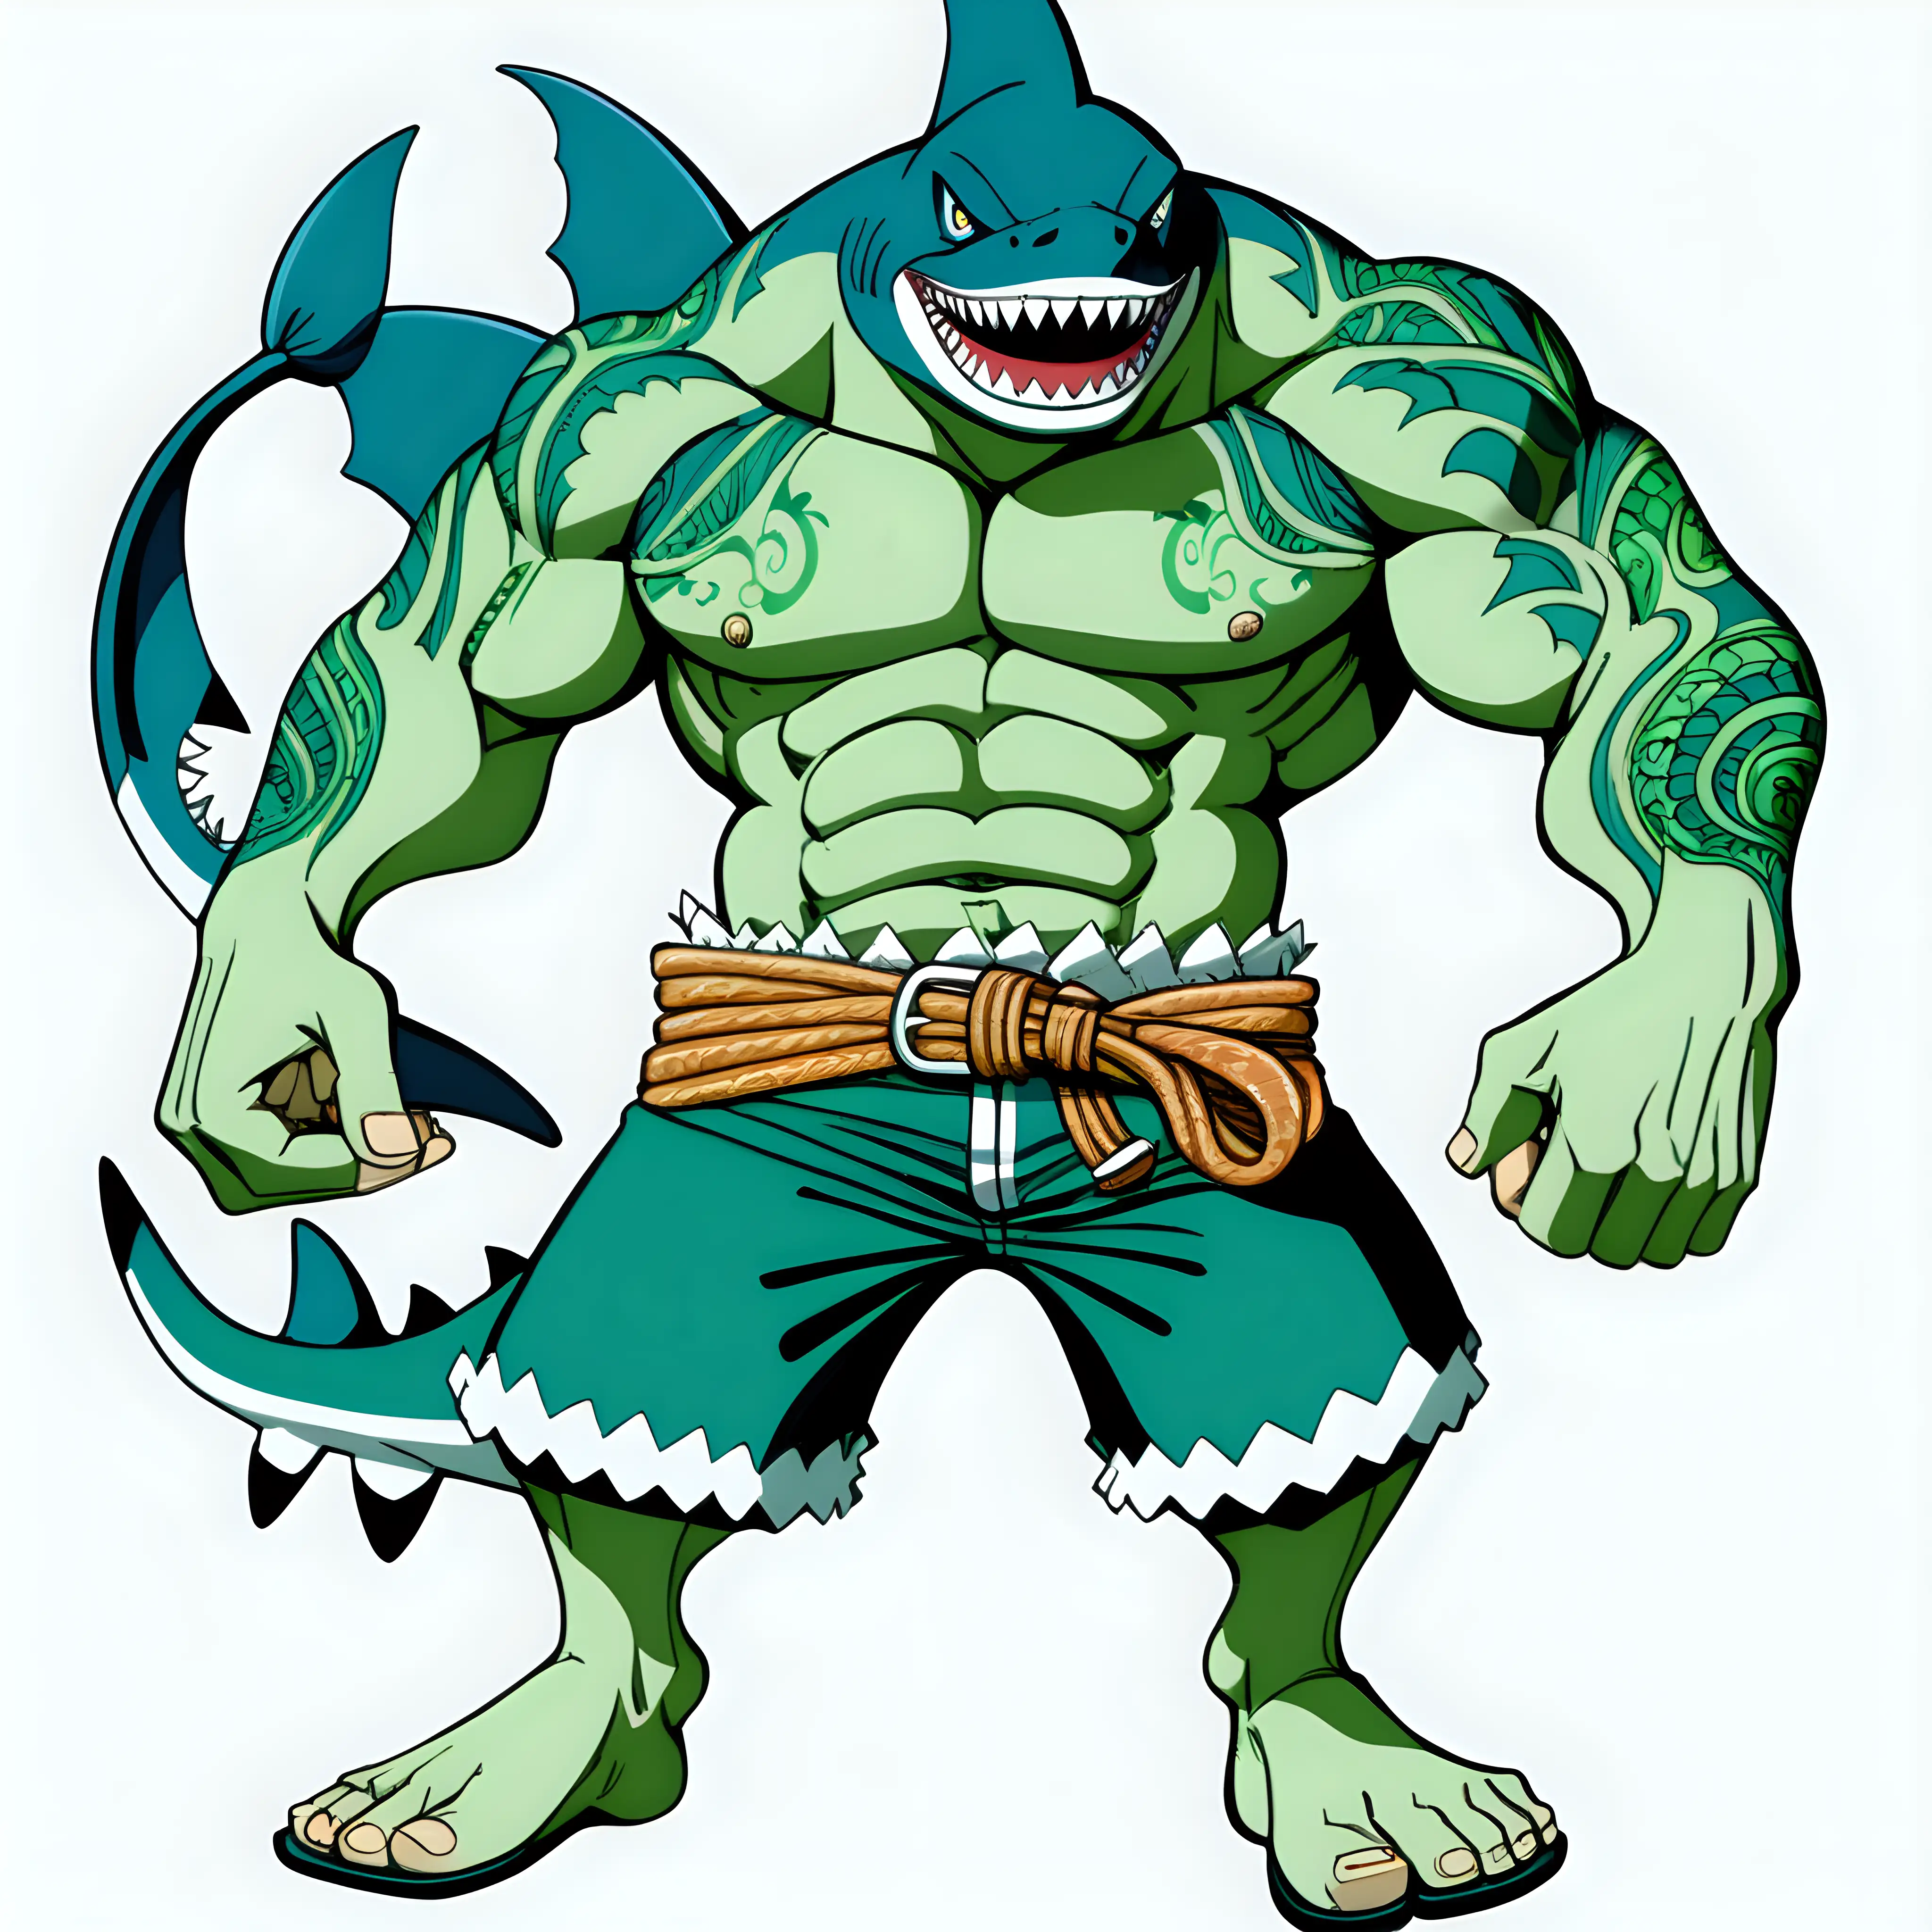 a shark fishman from one piece who has green skin, razor jaws, muscular physique, paddles, wears capri pants and sandals, one piece drawing style.